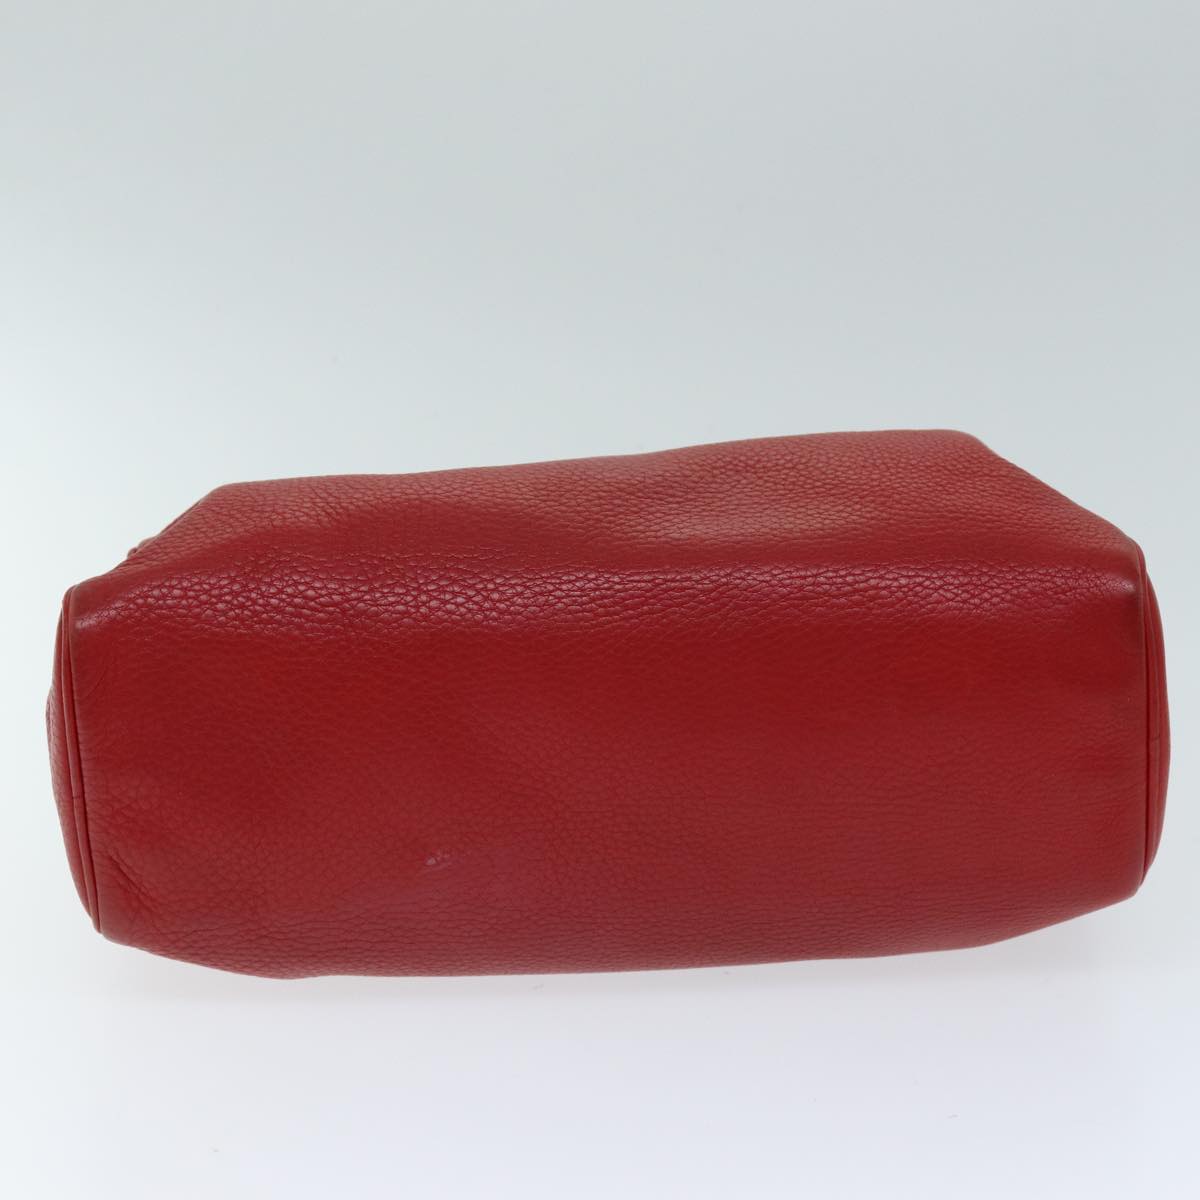 PRADA Hand Bag Leather Red Auth 74630